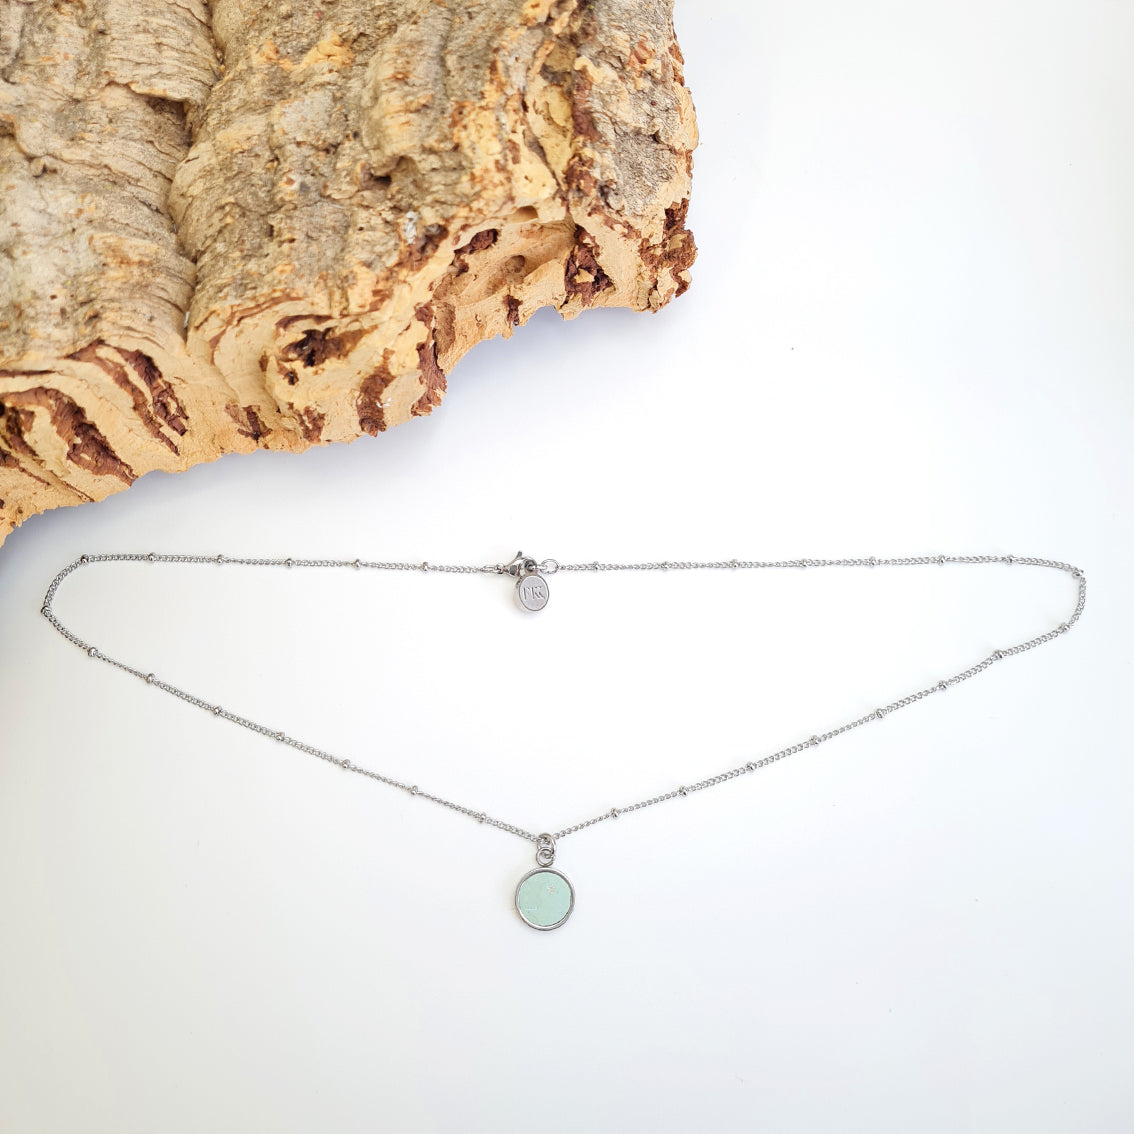 Fabrikk 1 Small Planet Necklace | Mint Green | Vegan 'Leather'